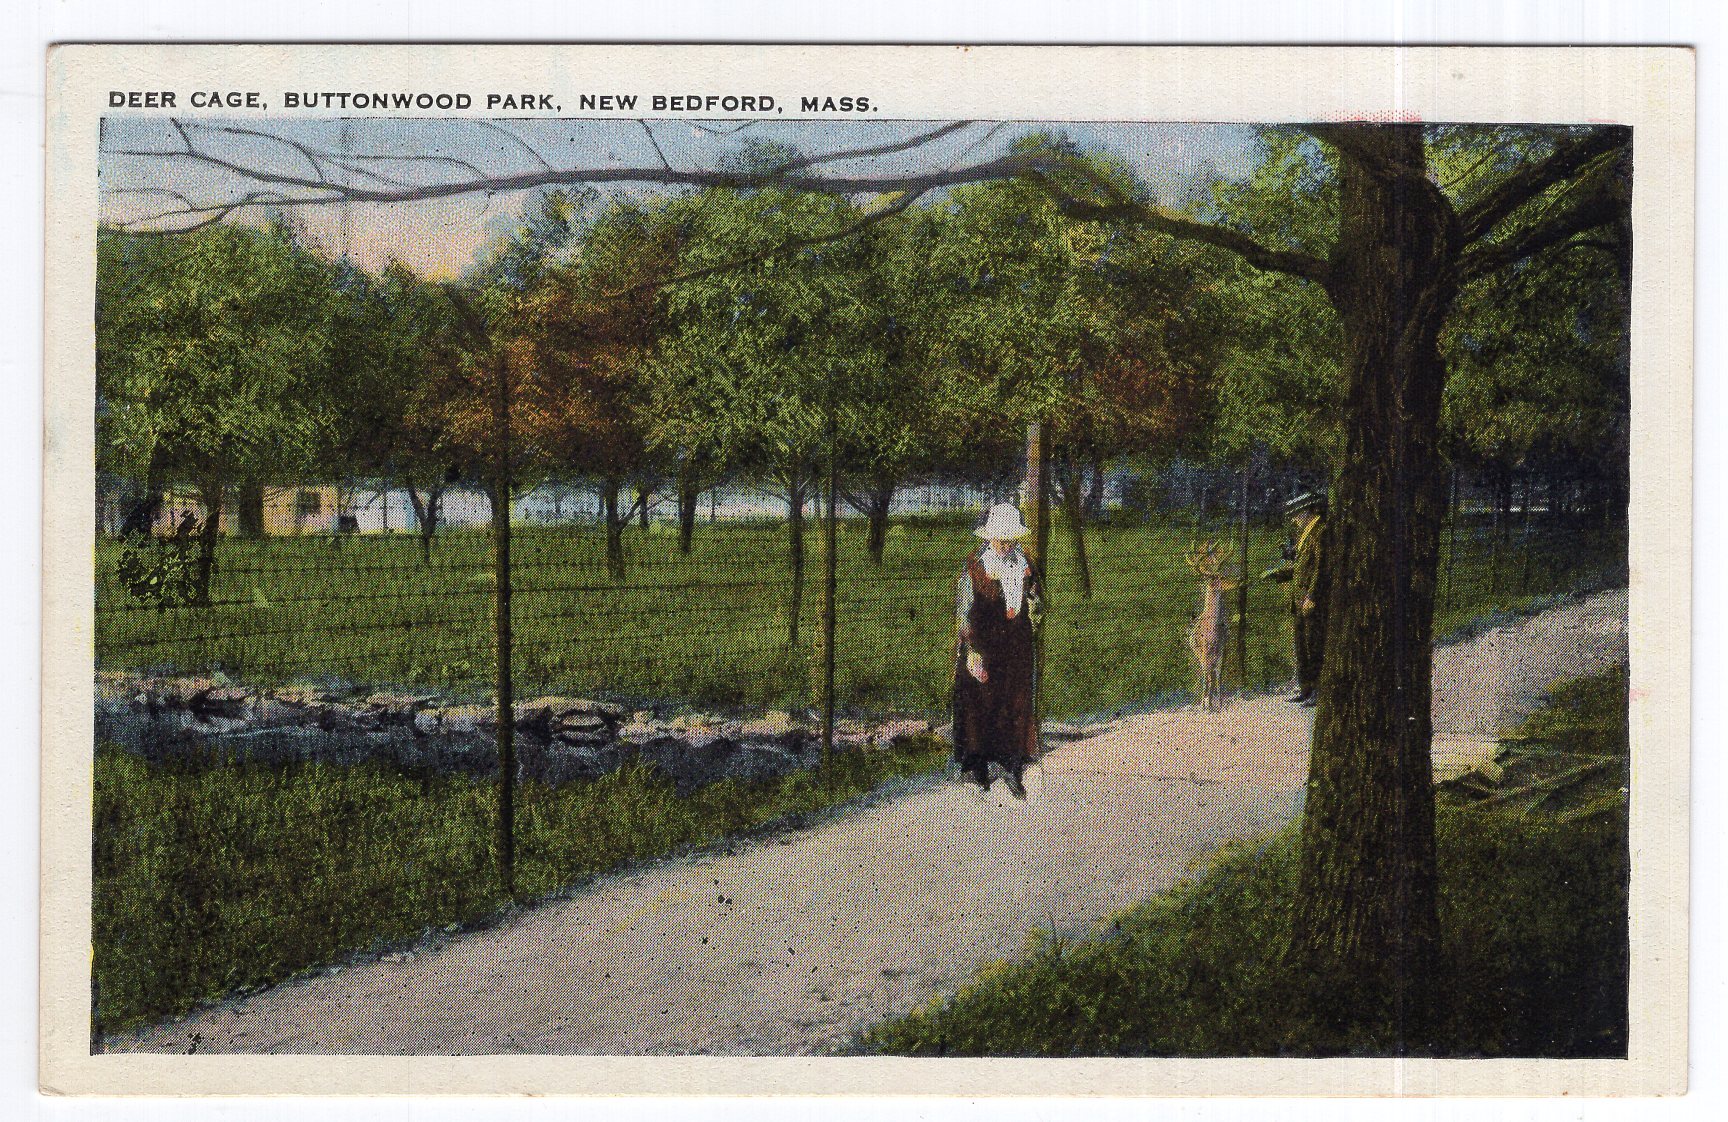 New Bedford Mass Deer Cage Buttonwood Park United States